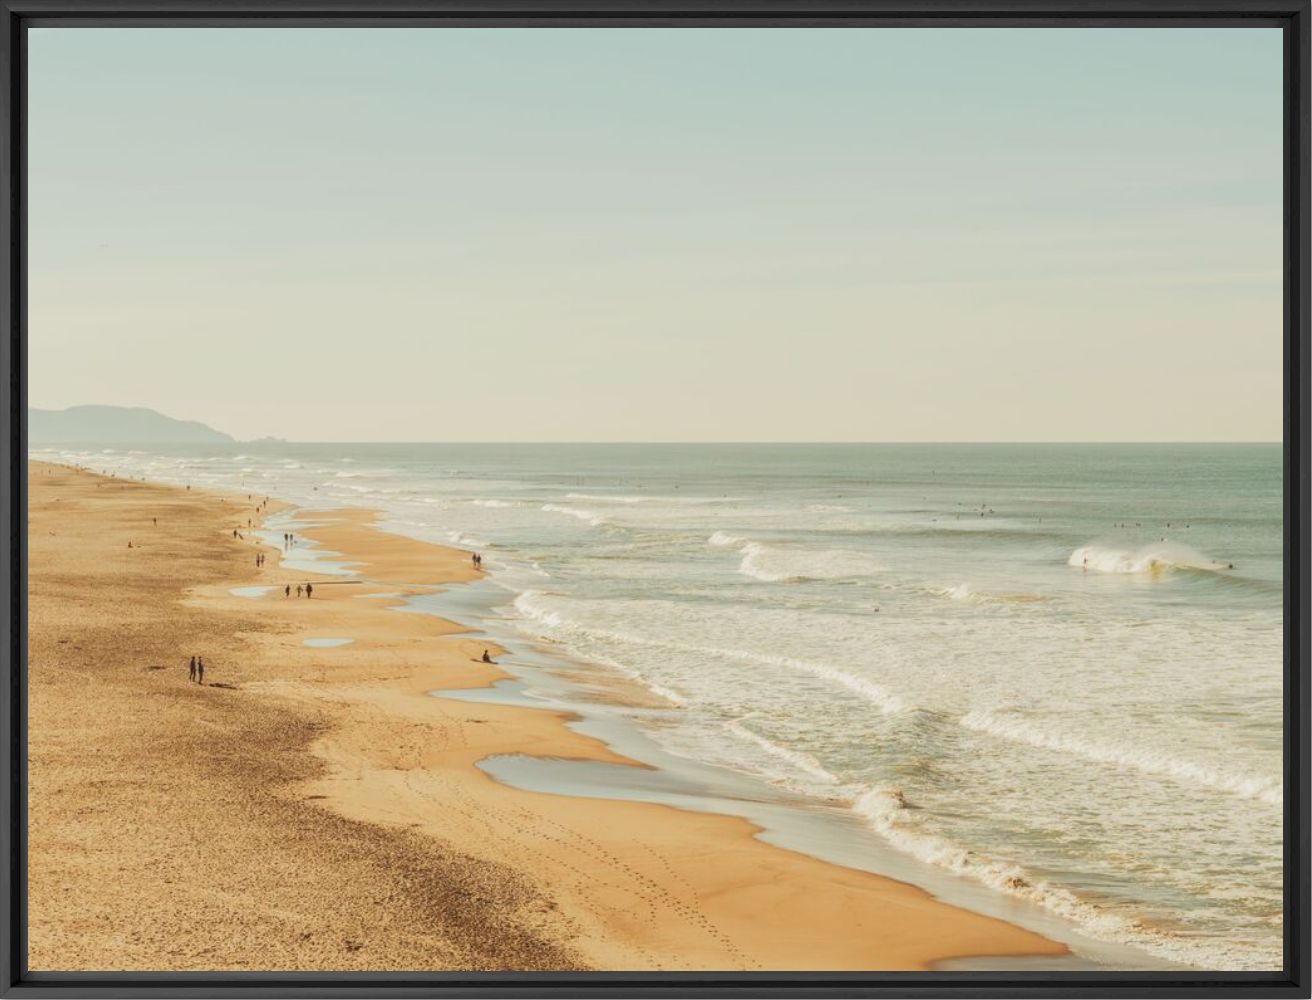 Photographie Sunday in ocean beach San Francisco - LUDWIG FAVRE - Tableau photo